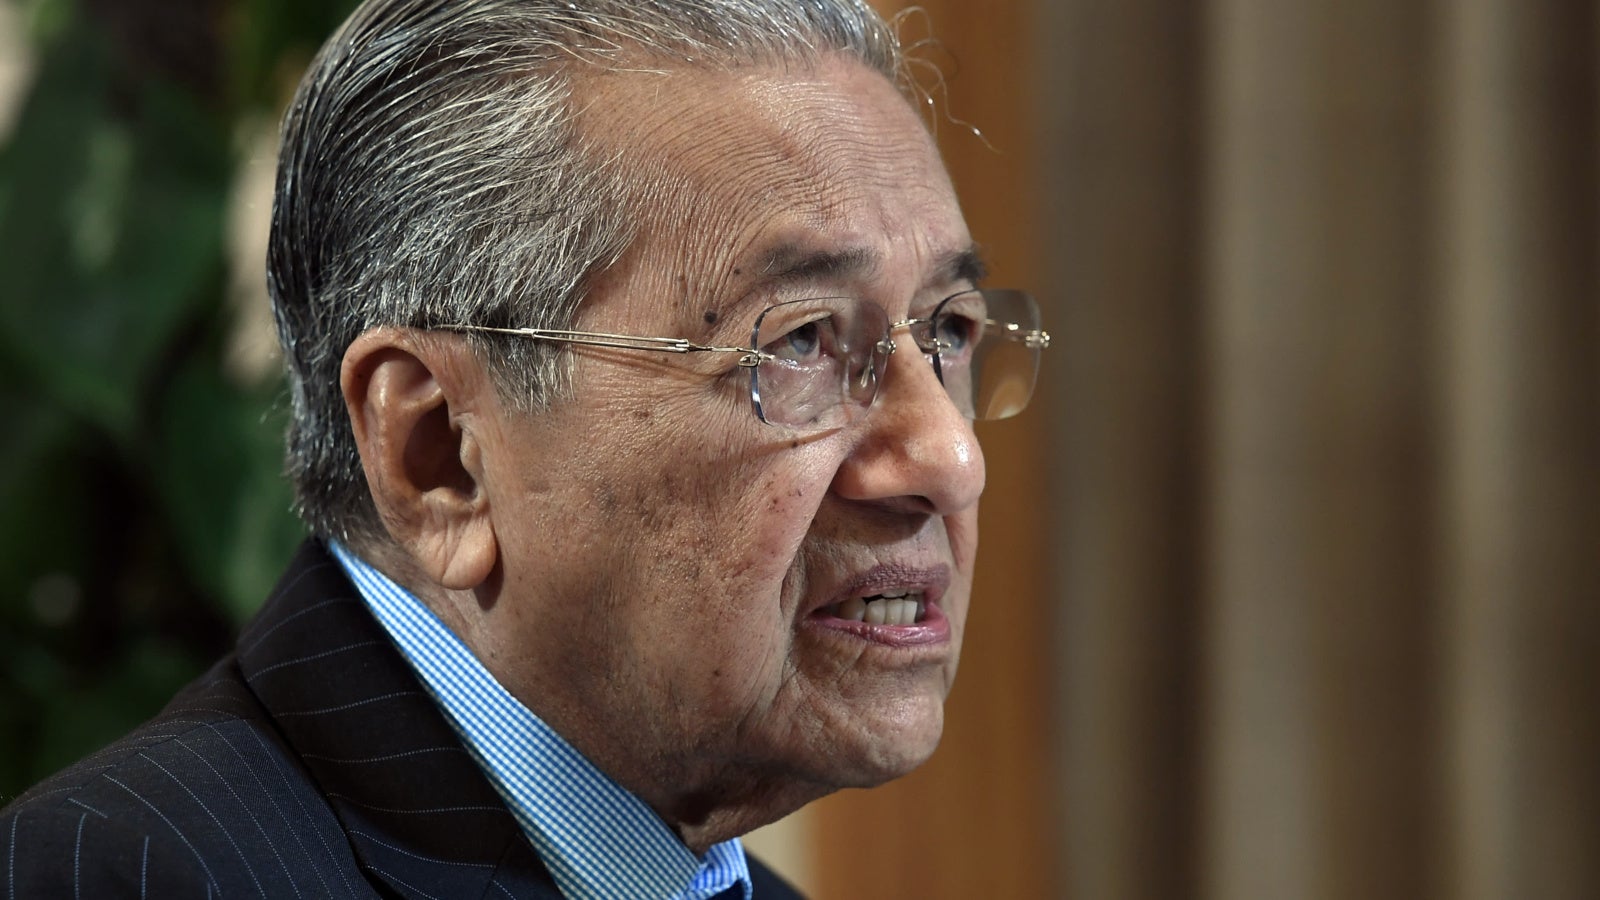 Report: Tun M Allegedly Wanted to Resign as PM Over Issues With New Johor MB, Syed Saddiq Convinced Him to Stay - WORLD OF BUZZ 3